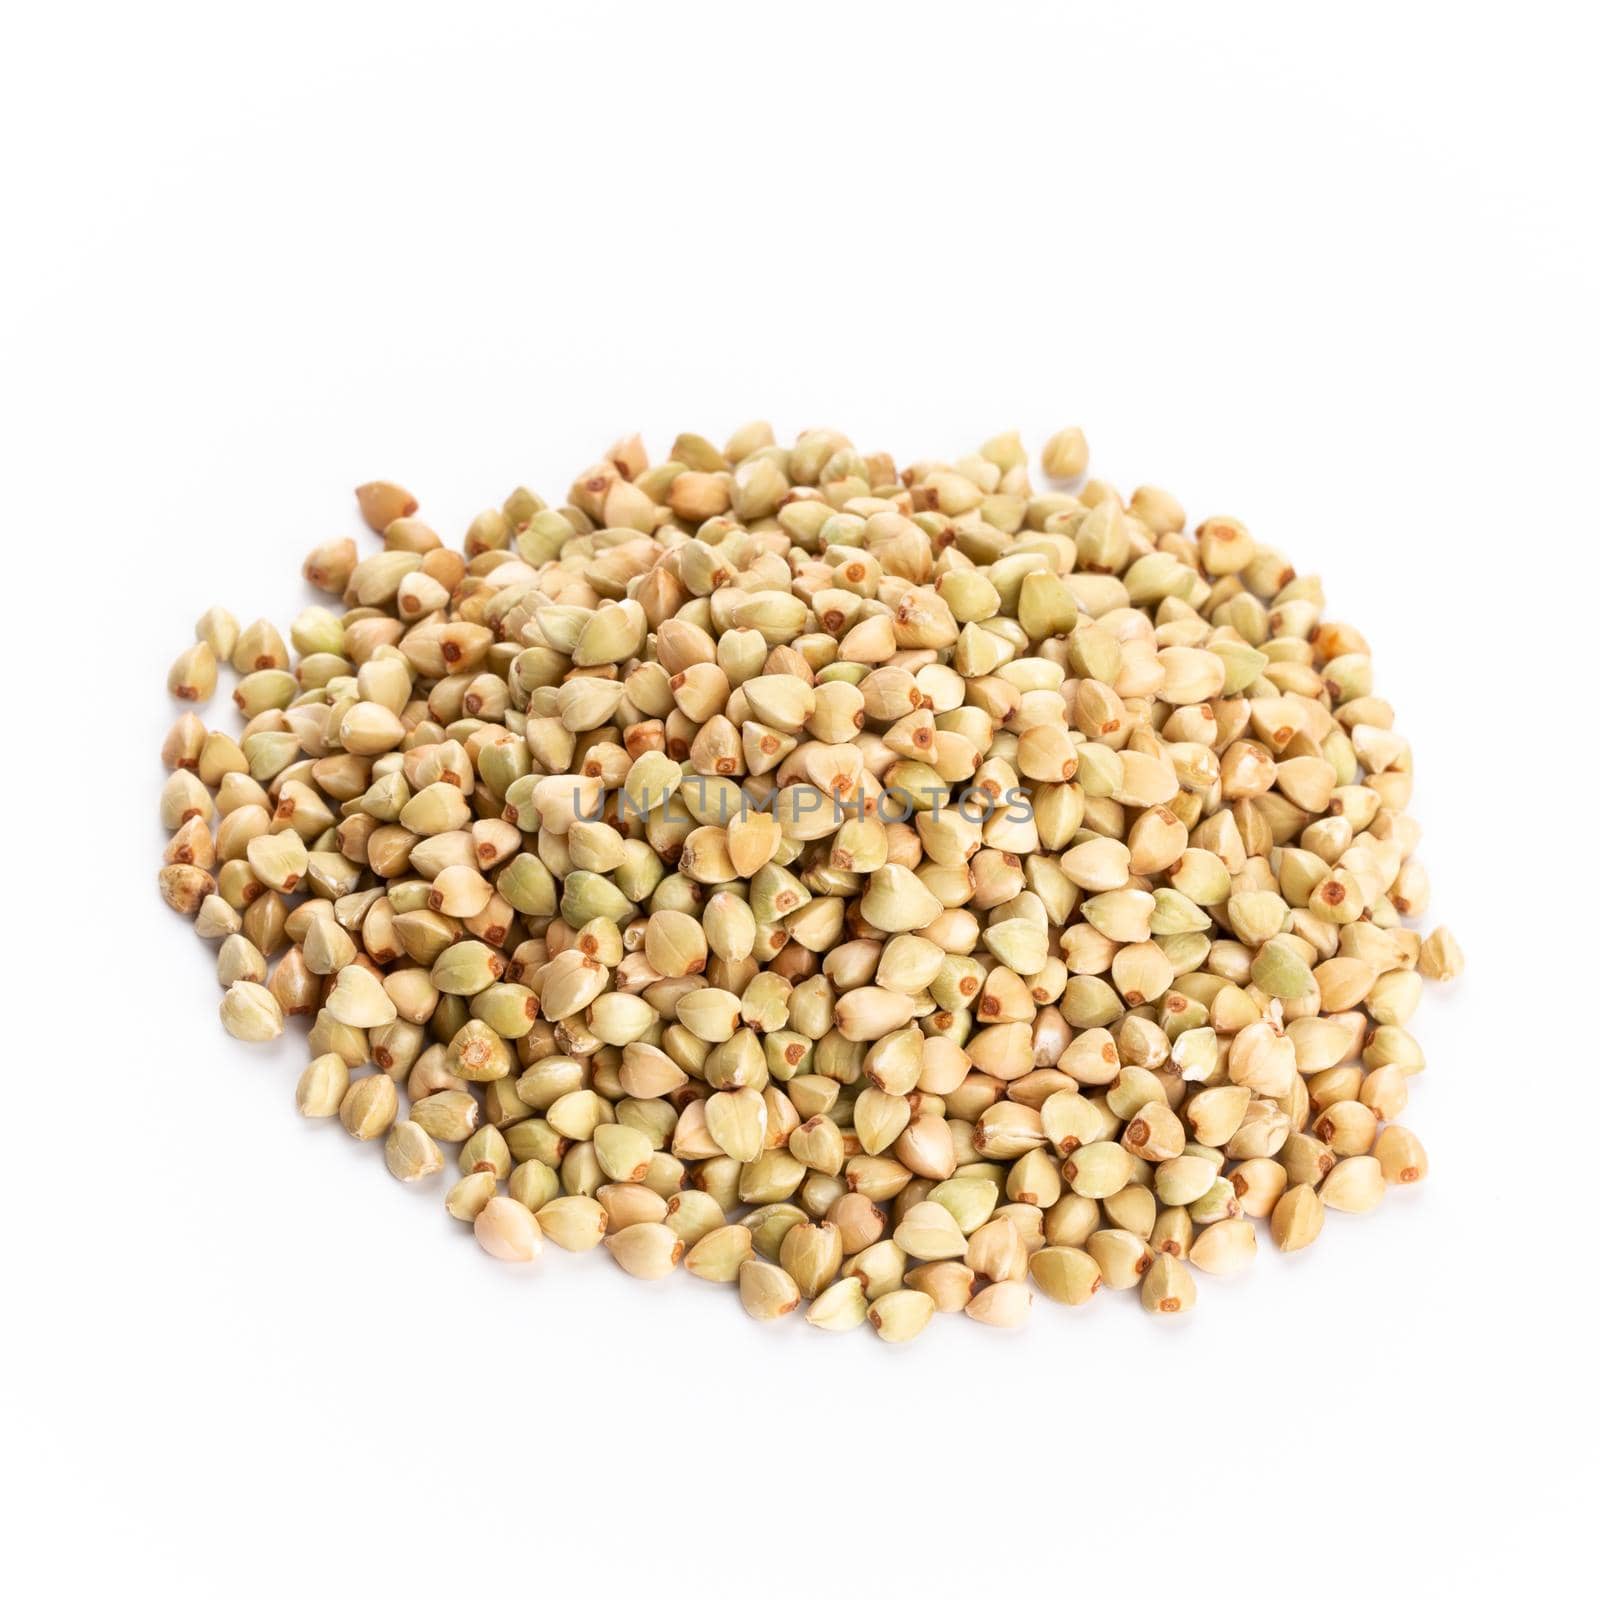 Heap of dried buckwheat seeds isolated on white background. by gitusik